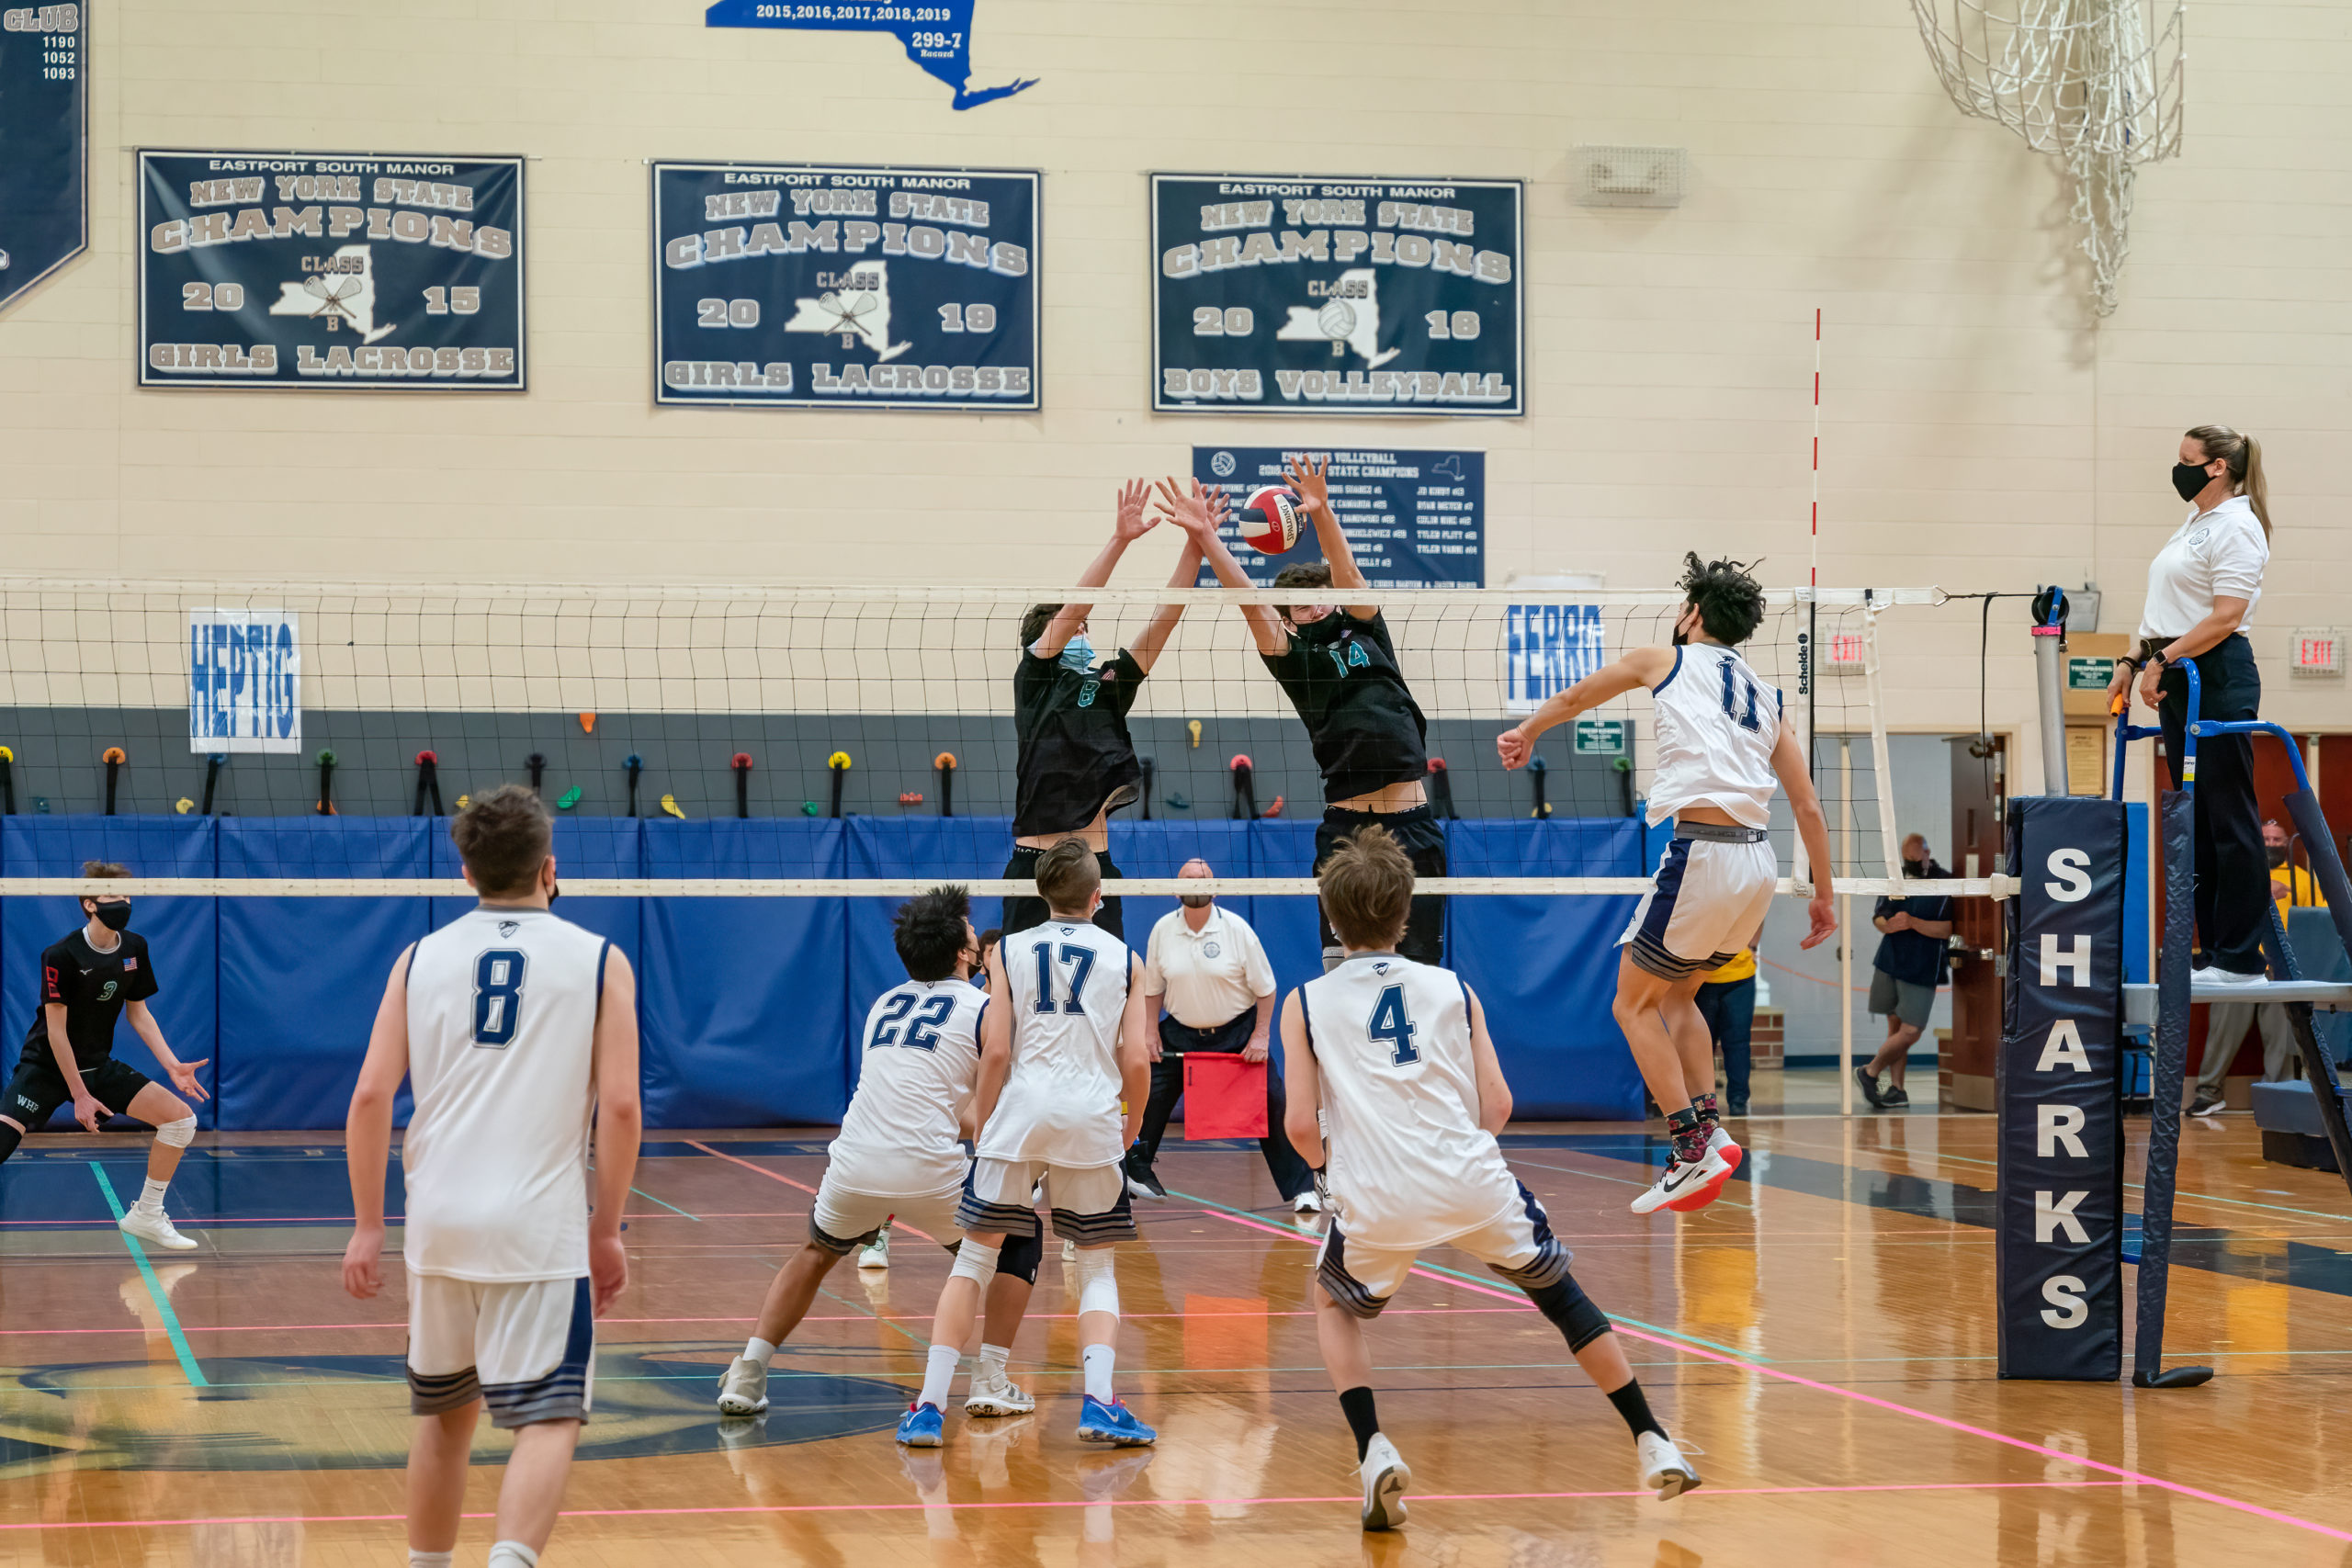 Hurricanes Colbie Mason, left, and Daniel Haber set up a block at the net.